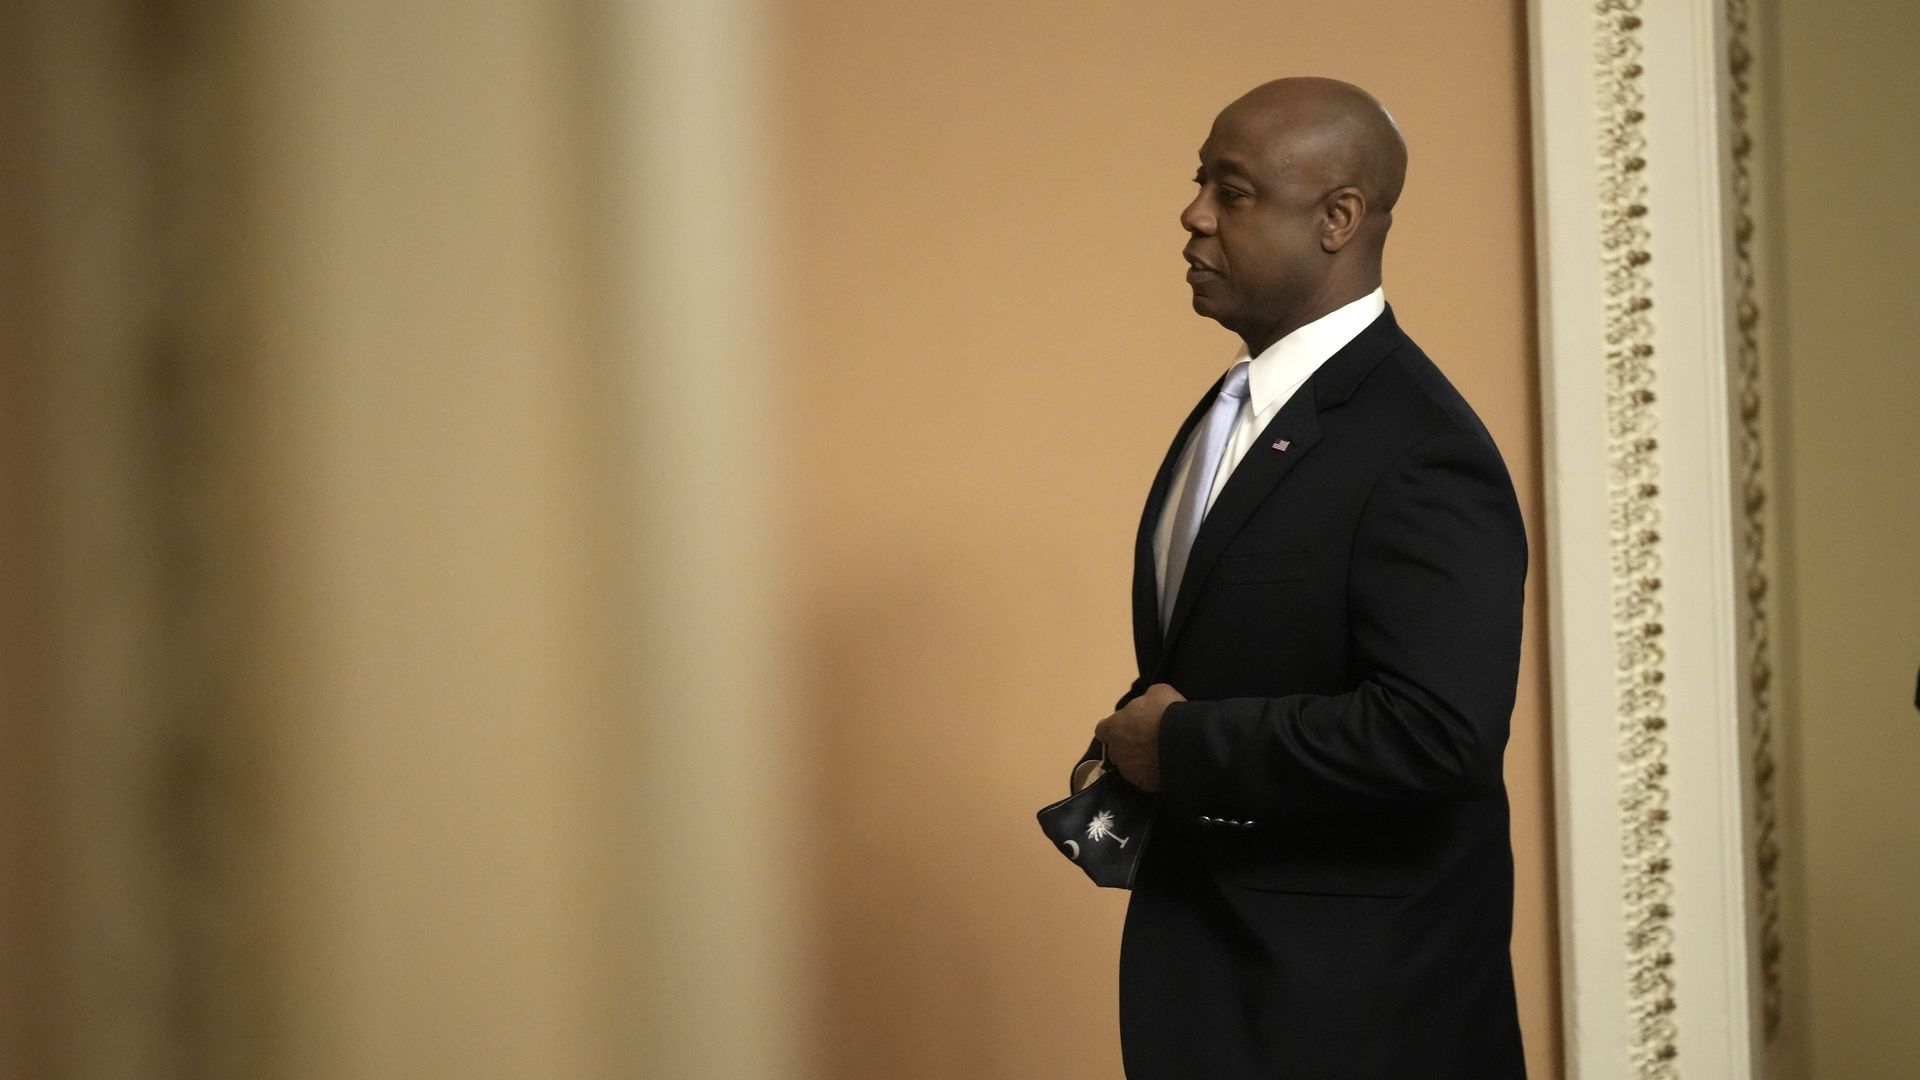 Photo of Tim Scott holding a mask and walking